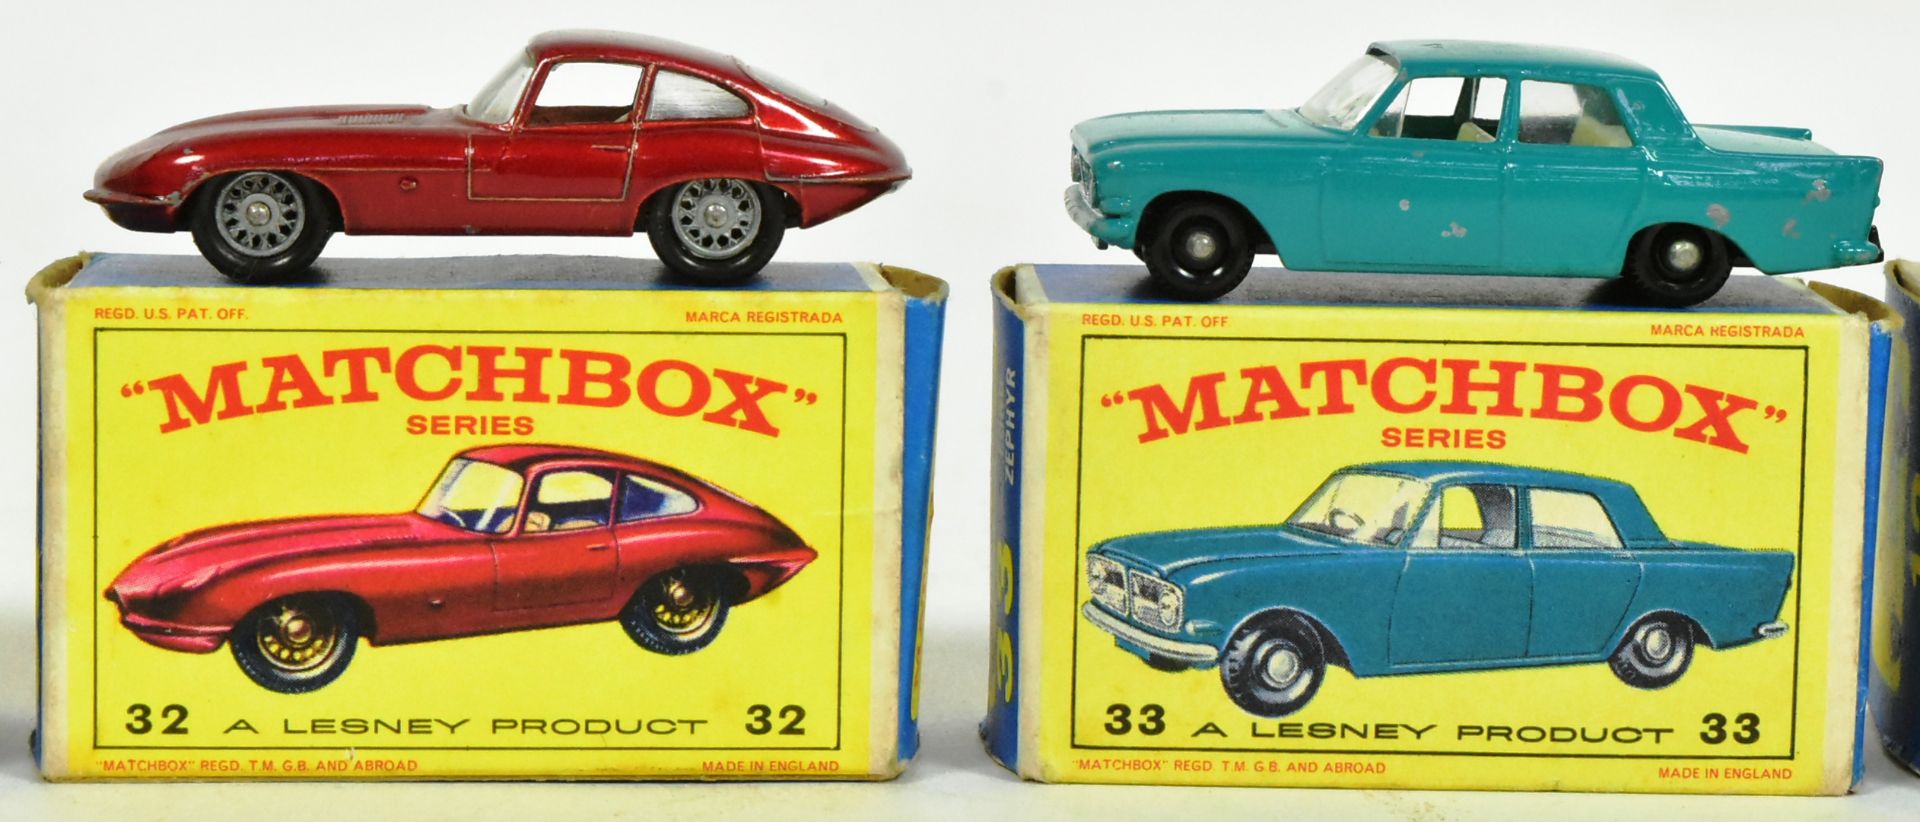 DIECAST - COLLECTION OF VINTAGE MATCHBOX DIECAST MODELS - Image 3 of 4